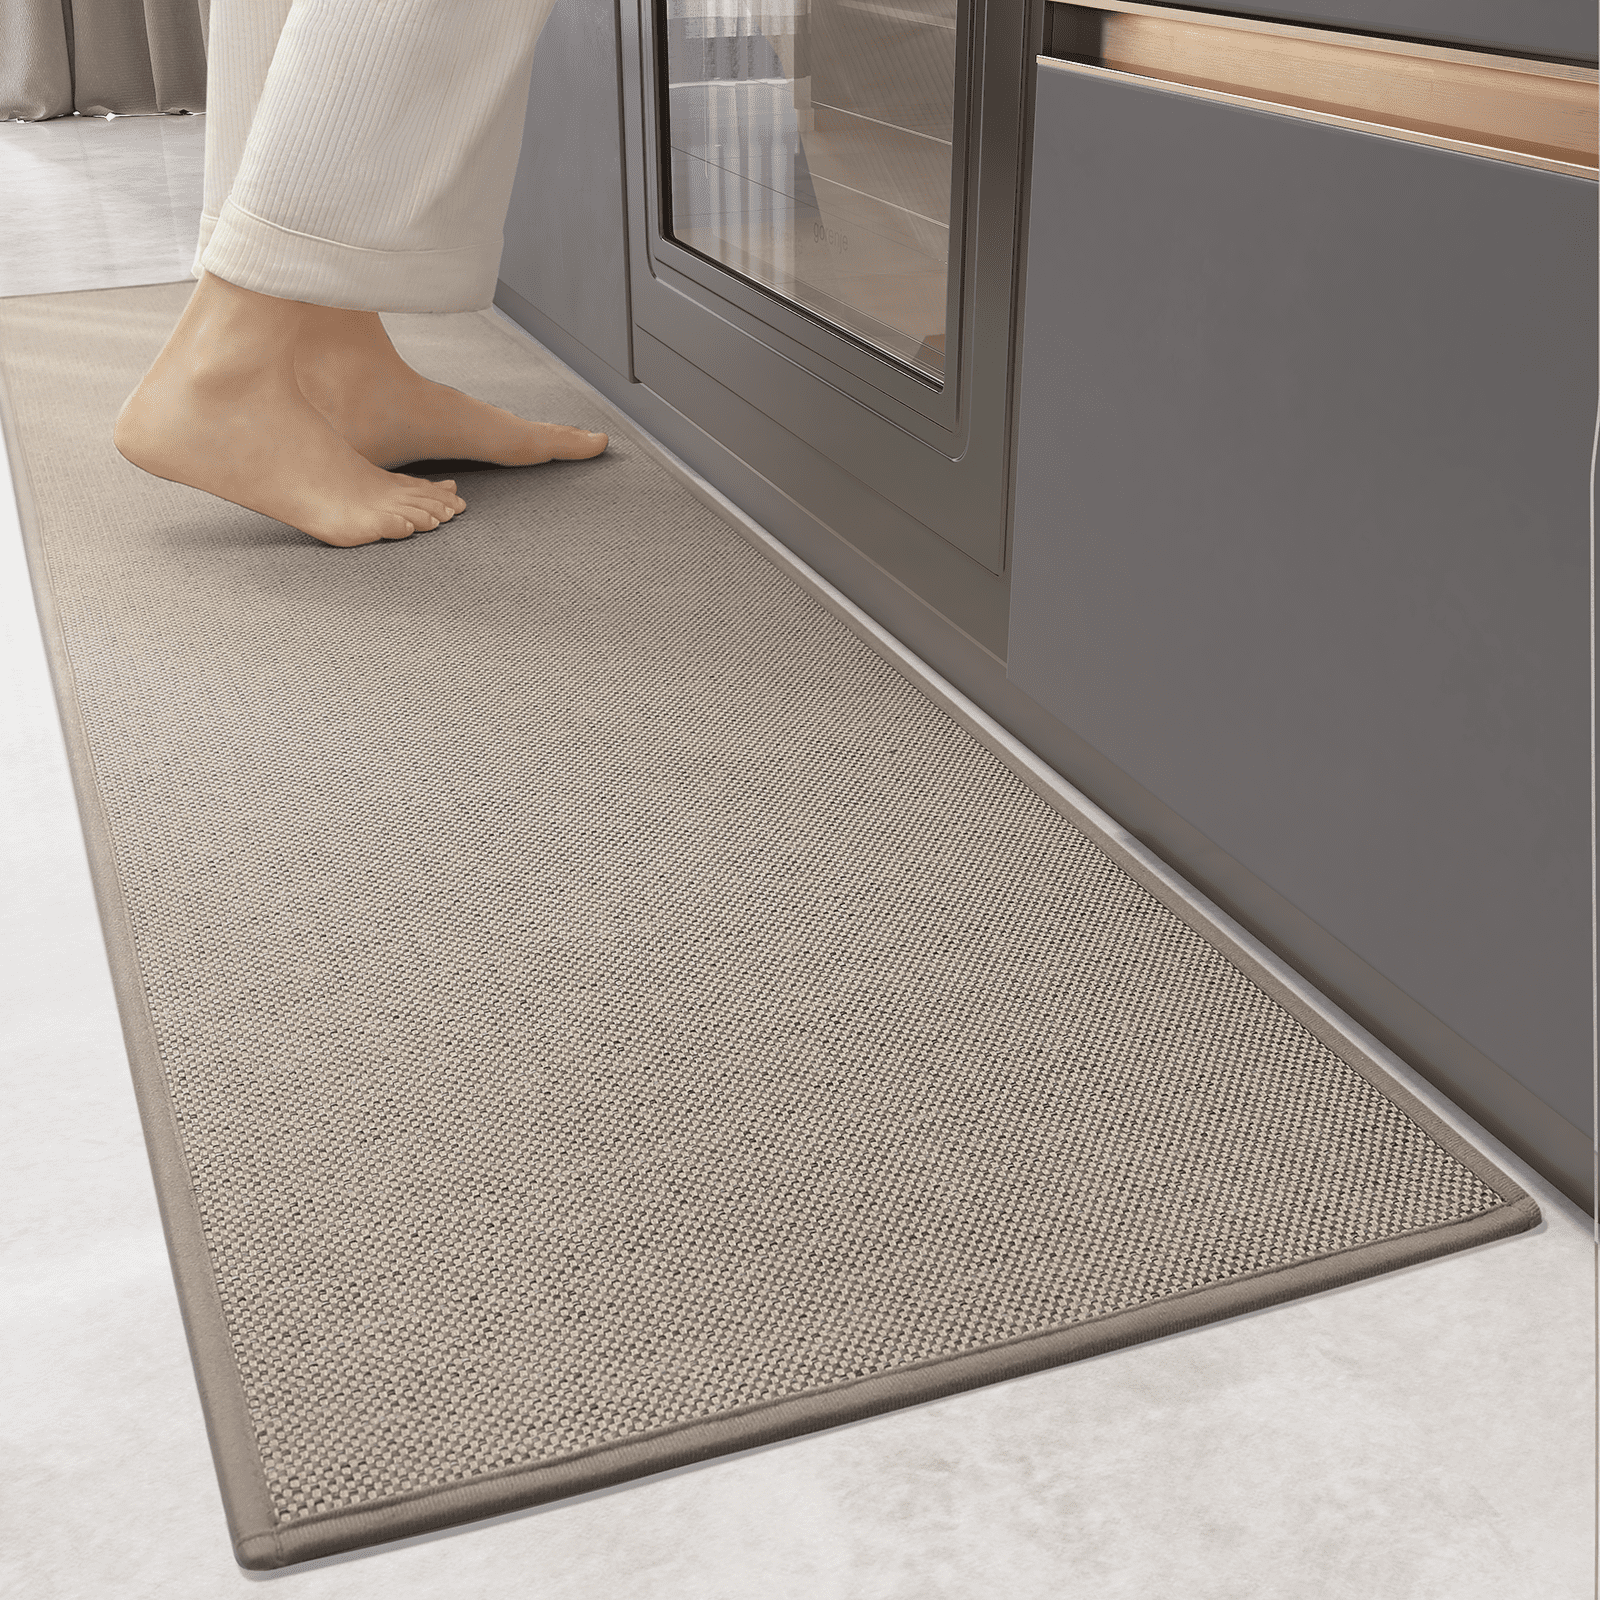 PABUBE Kitchen Rugs Non Slip Washable Absorbent Kitchen Mats Woven Kitchen Runner Rug Kitchen Floor Mats for in Front of Sink Laundry Room Hallway,17" x 71", Khaki